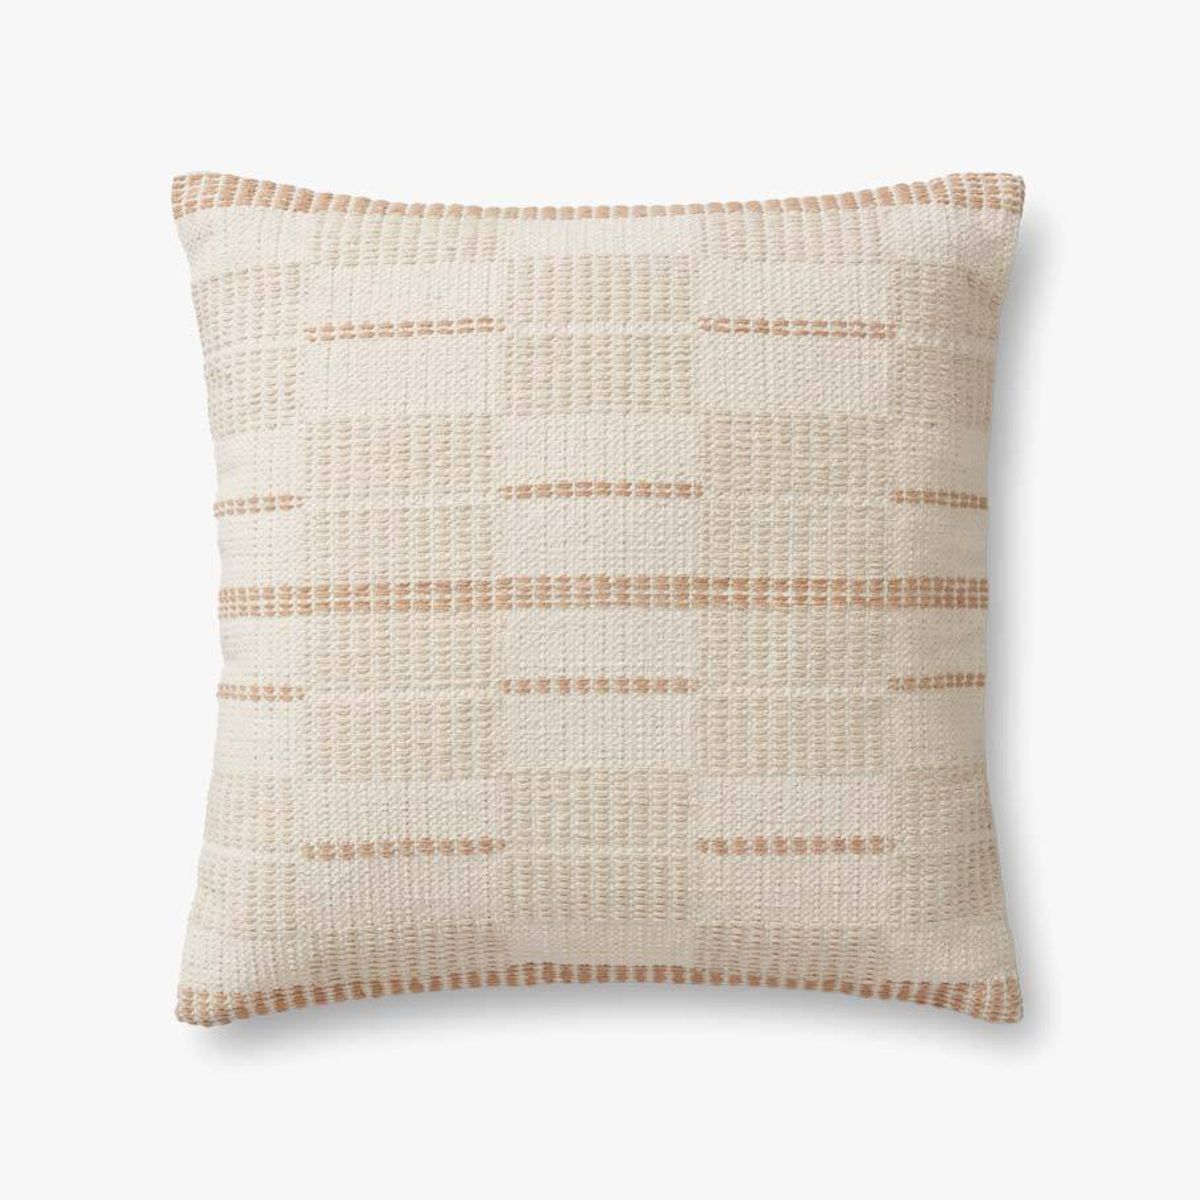 Shop Throw Pillow, Down-Filled from Peggy Haddad Interiors Home on Openhaus